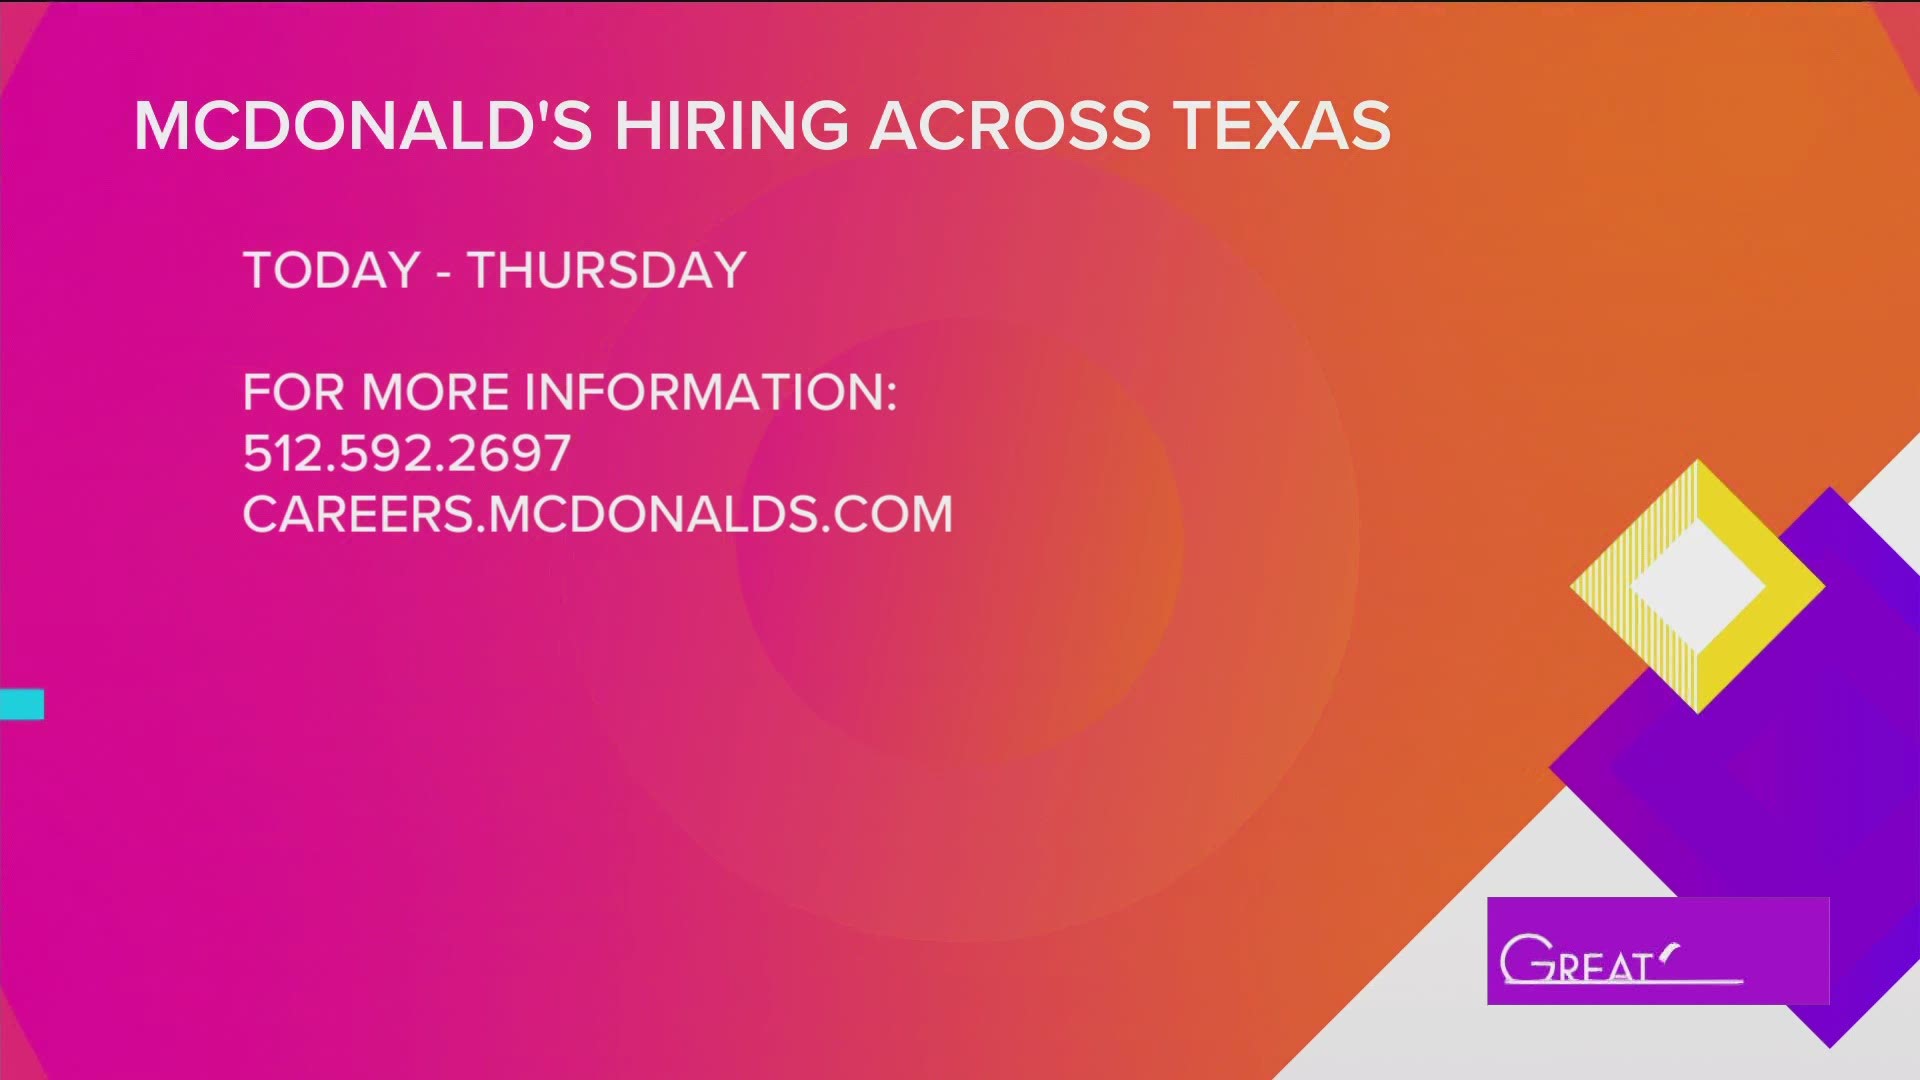 Mcdonald's is hiring! Paul Mireles talks with a franchise owner and learns more.